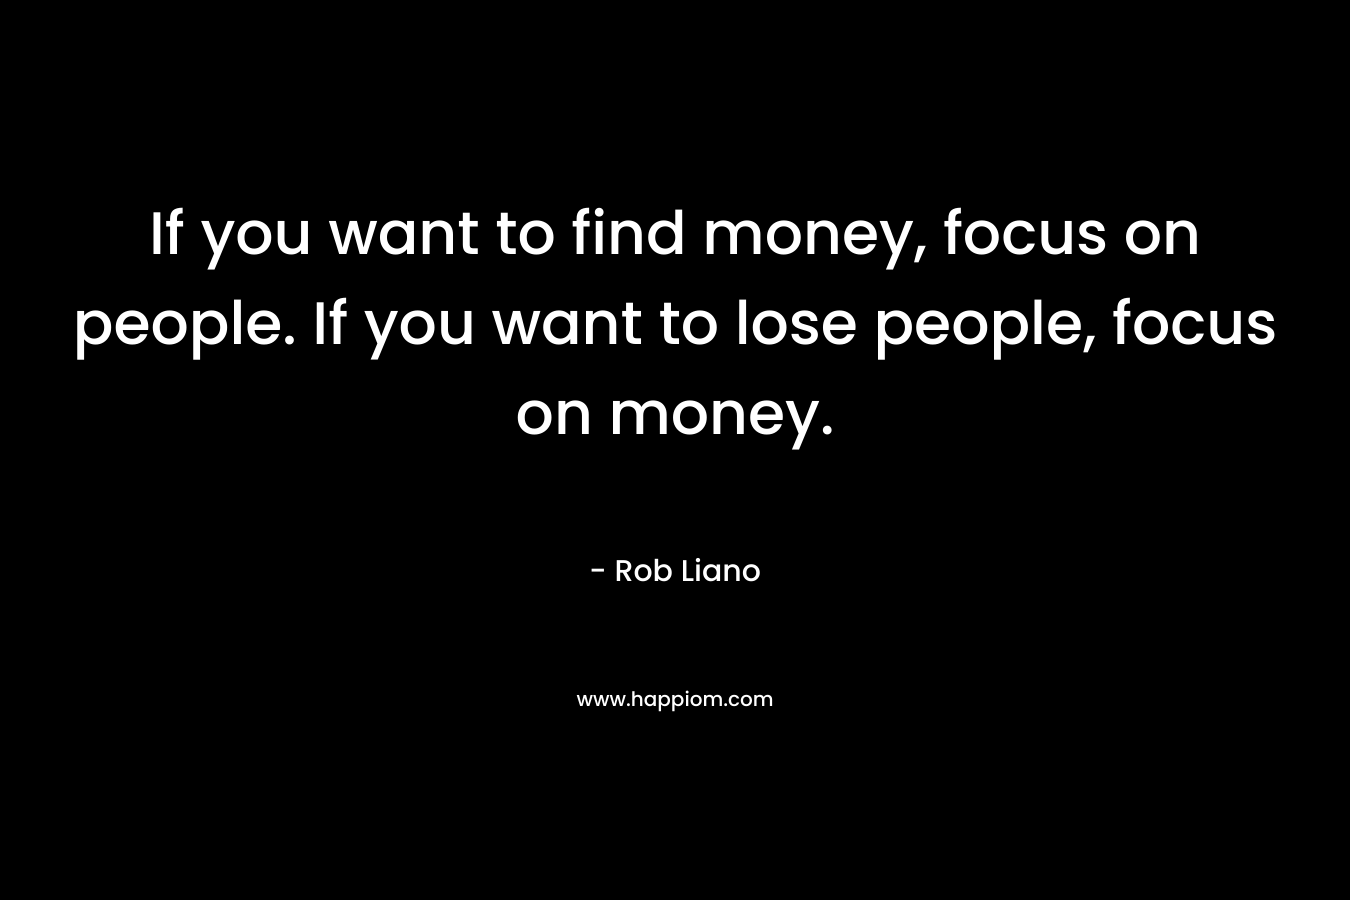 If you want to find money, focus on people. If you want to lose people, focus on money.